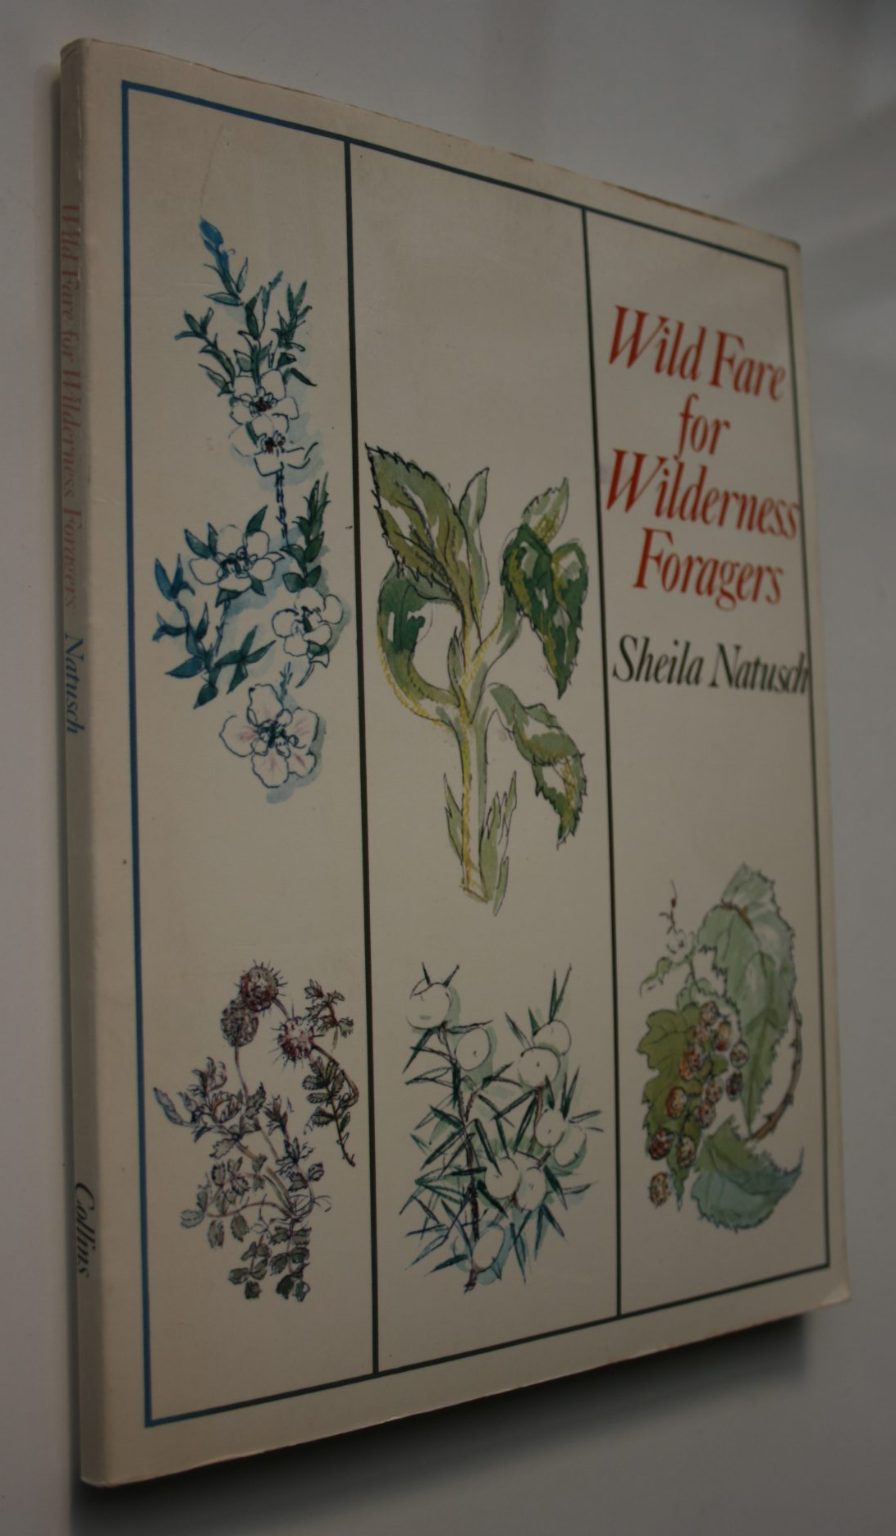 Wild Fare for Wilderness Foragers by Sheila Natusch.